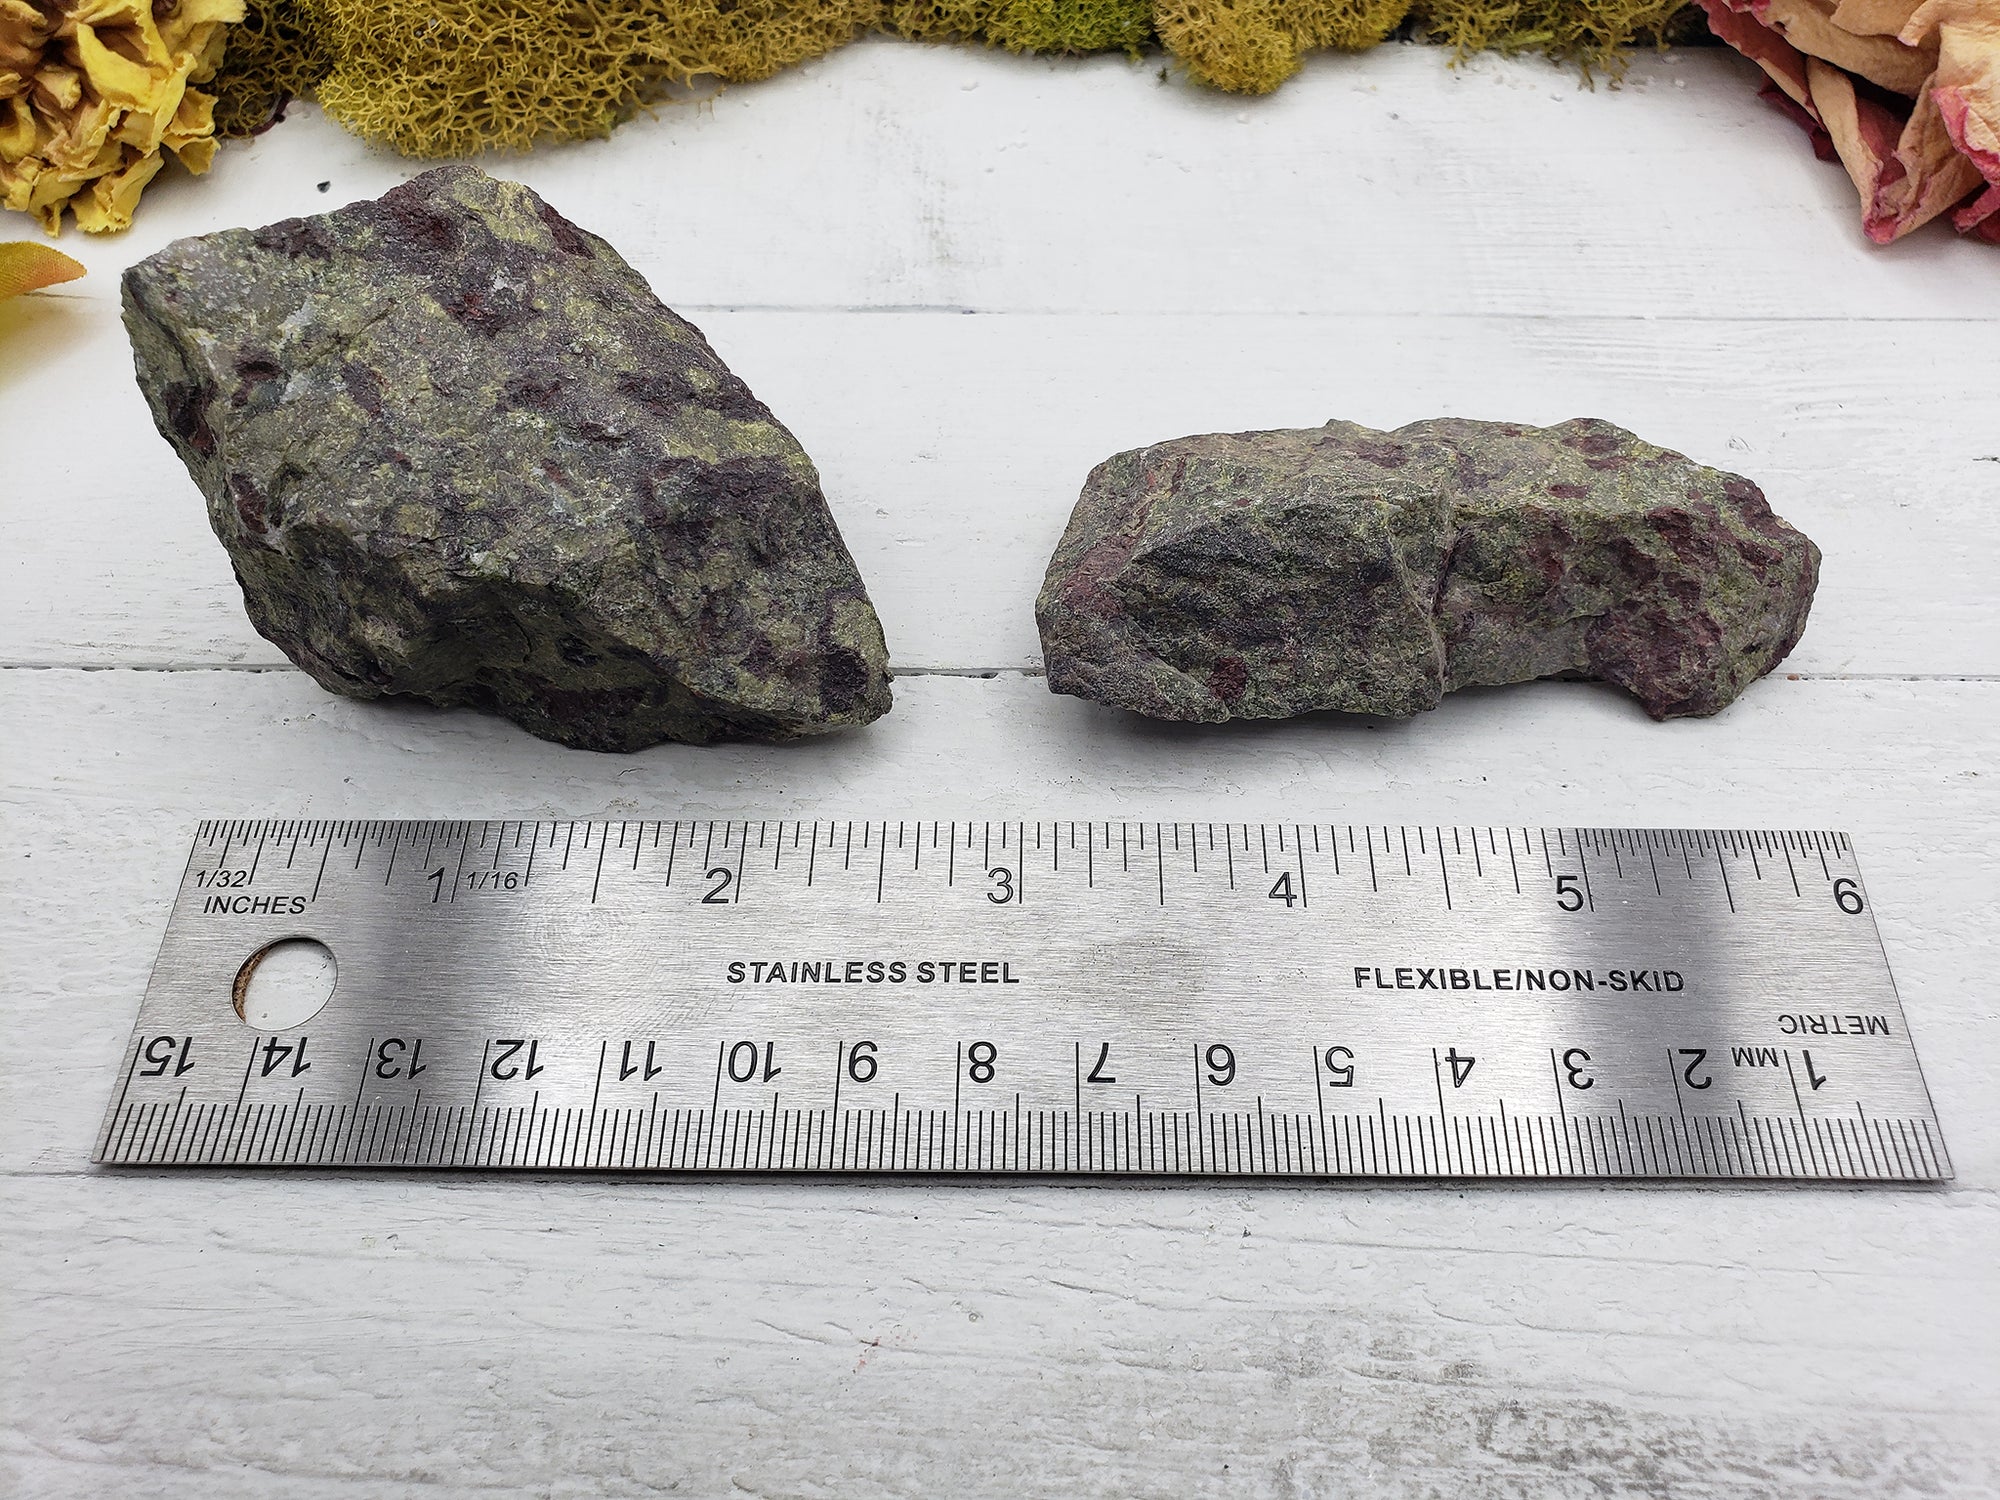 two dragon stone pieces by ruler for comparison